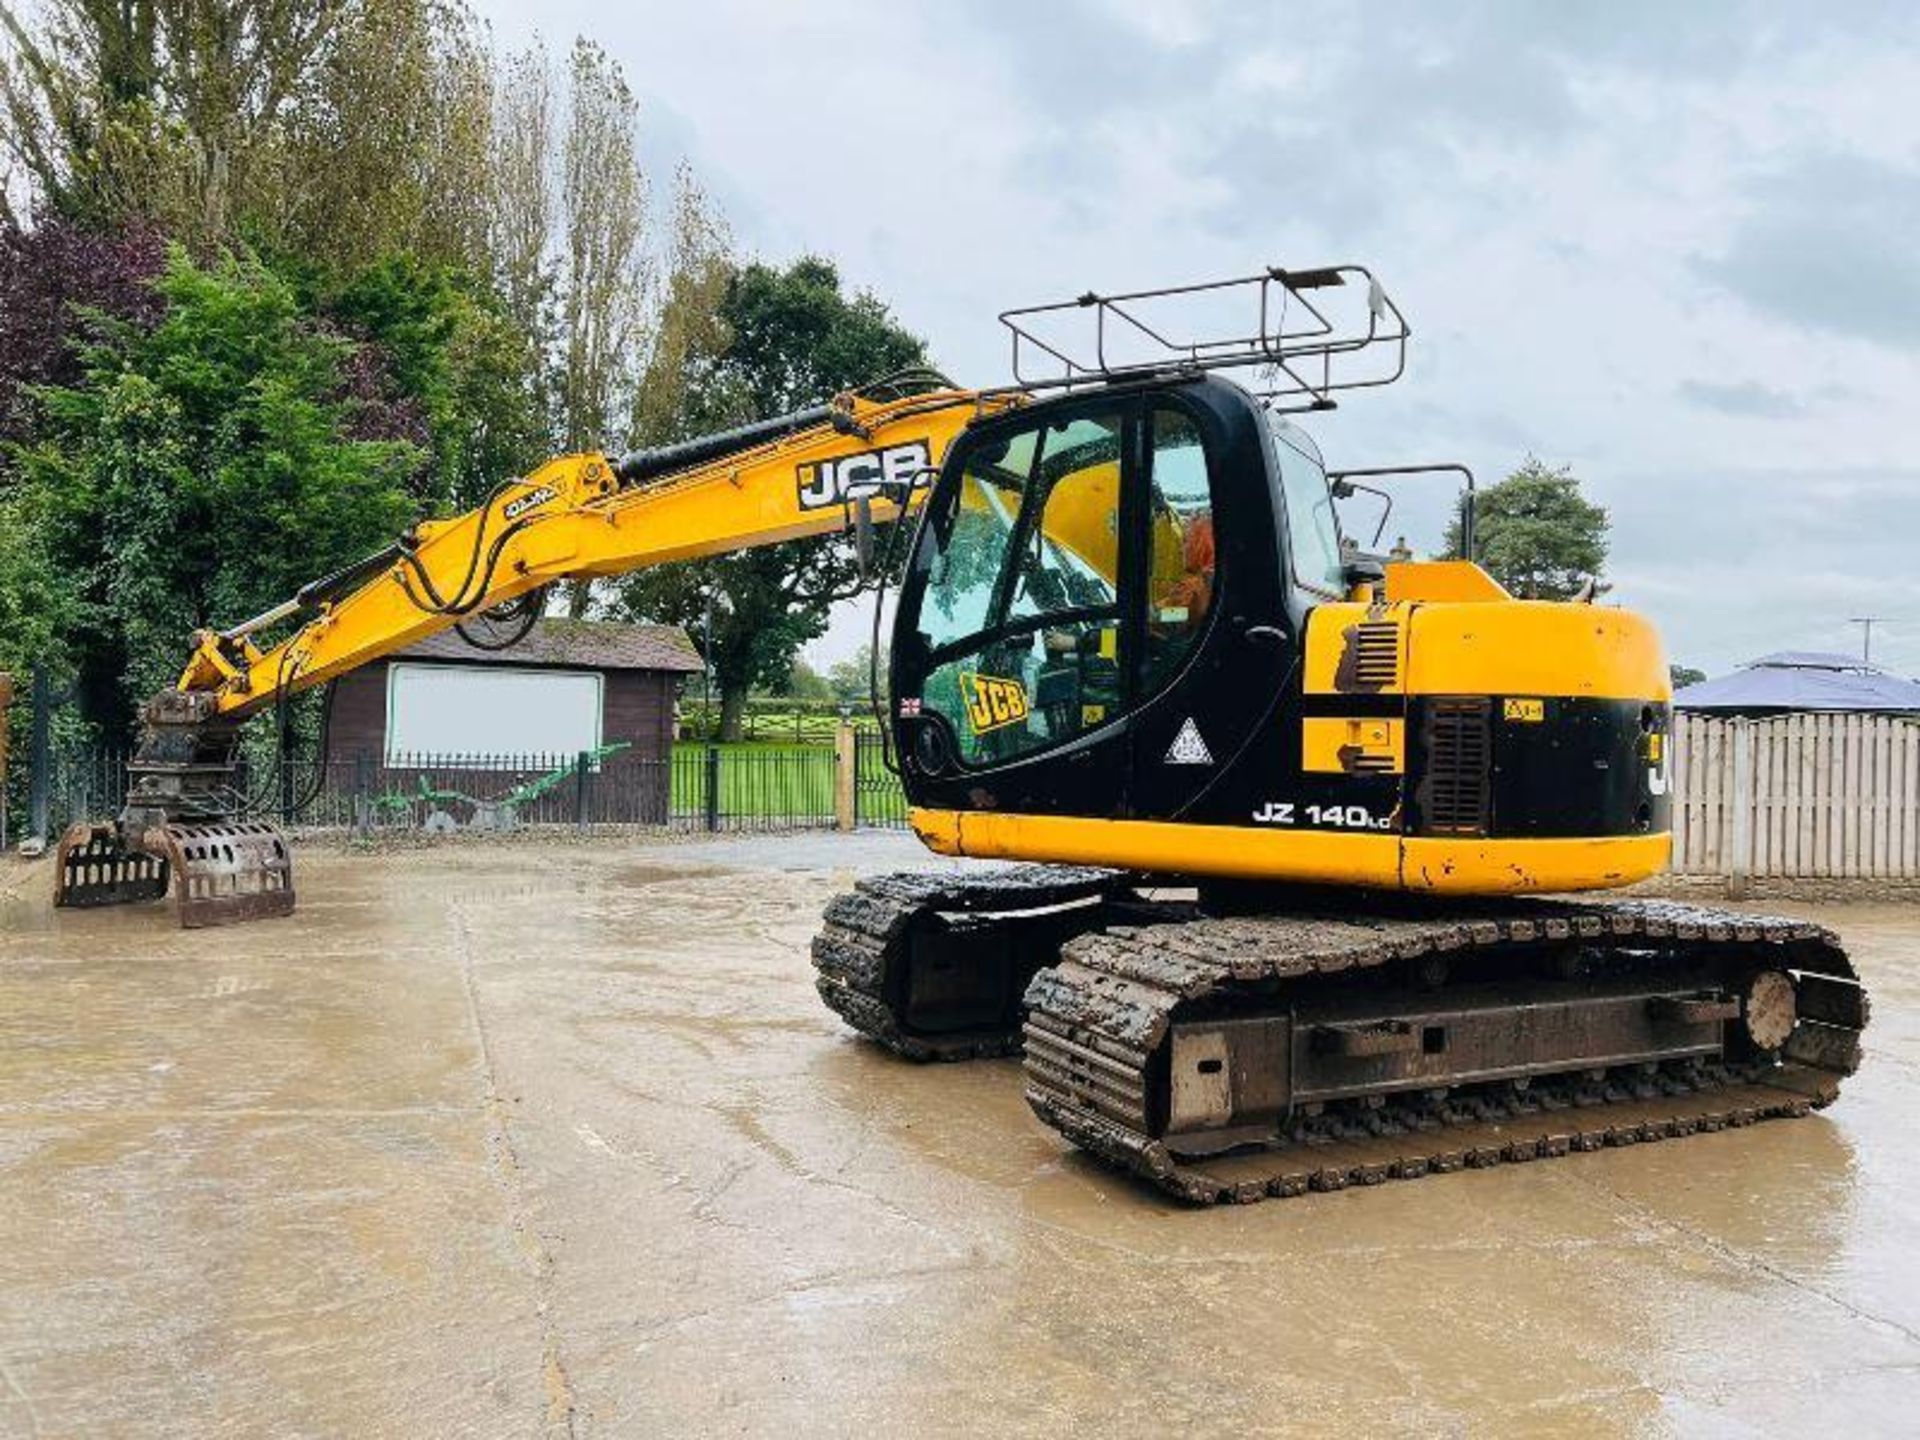 JCB JZ140 TRACKED EXCAVATOR *ZERO SWING* C/W QUICK HITCH & ROTATING SELECTOR GRAB. - Image 14 of 15